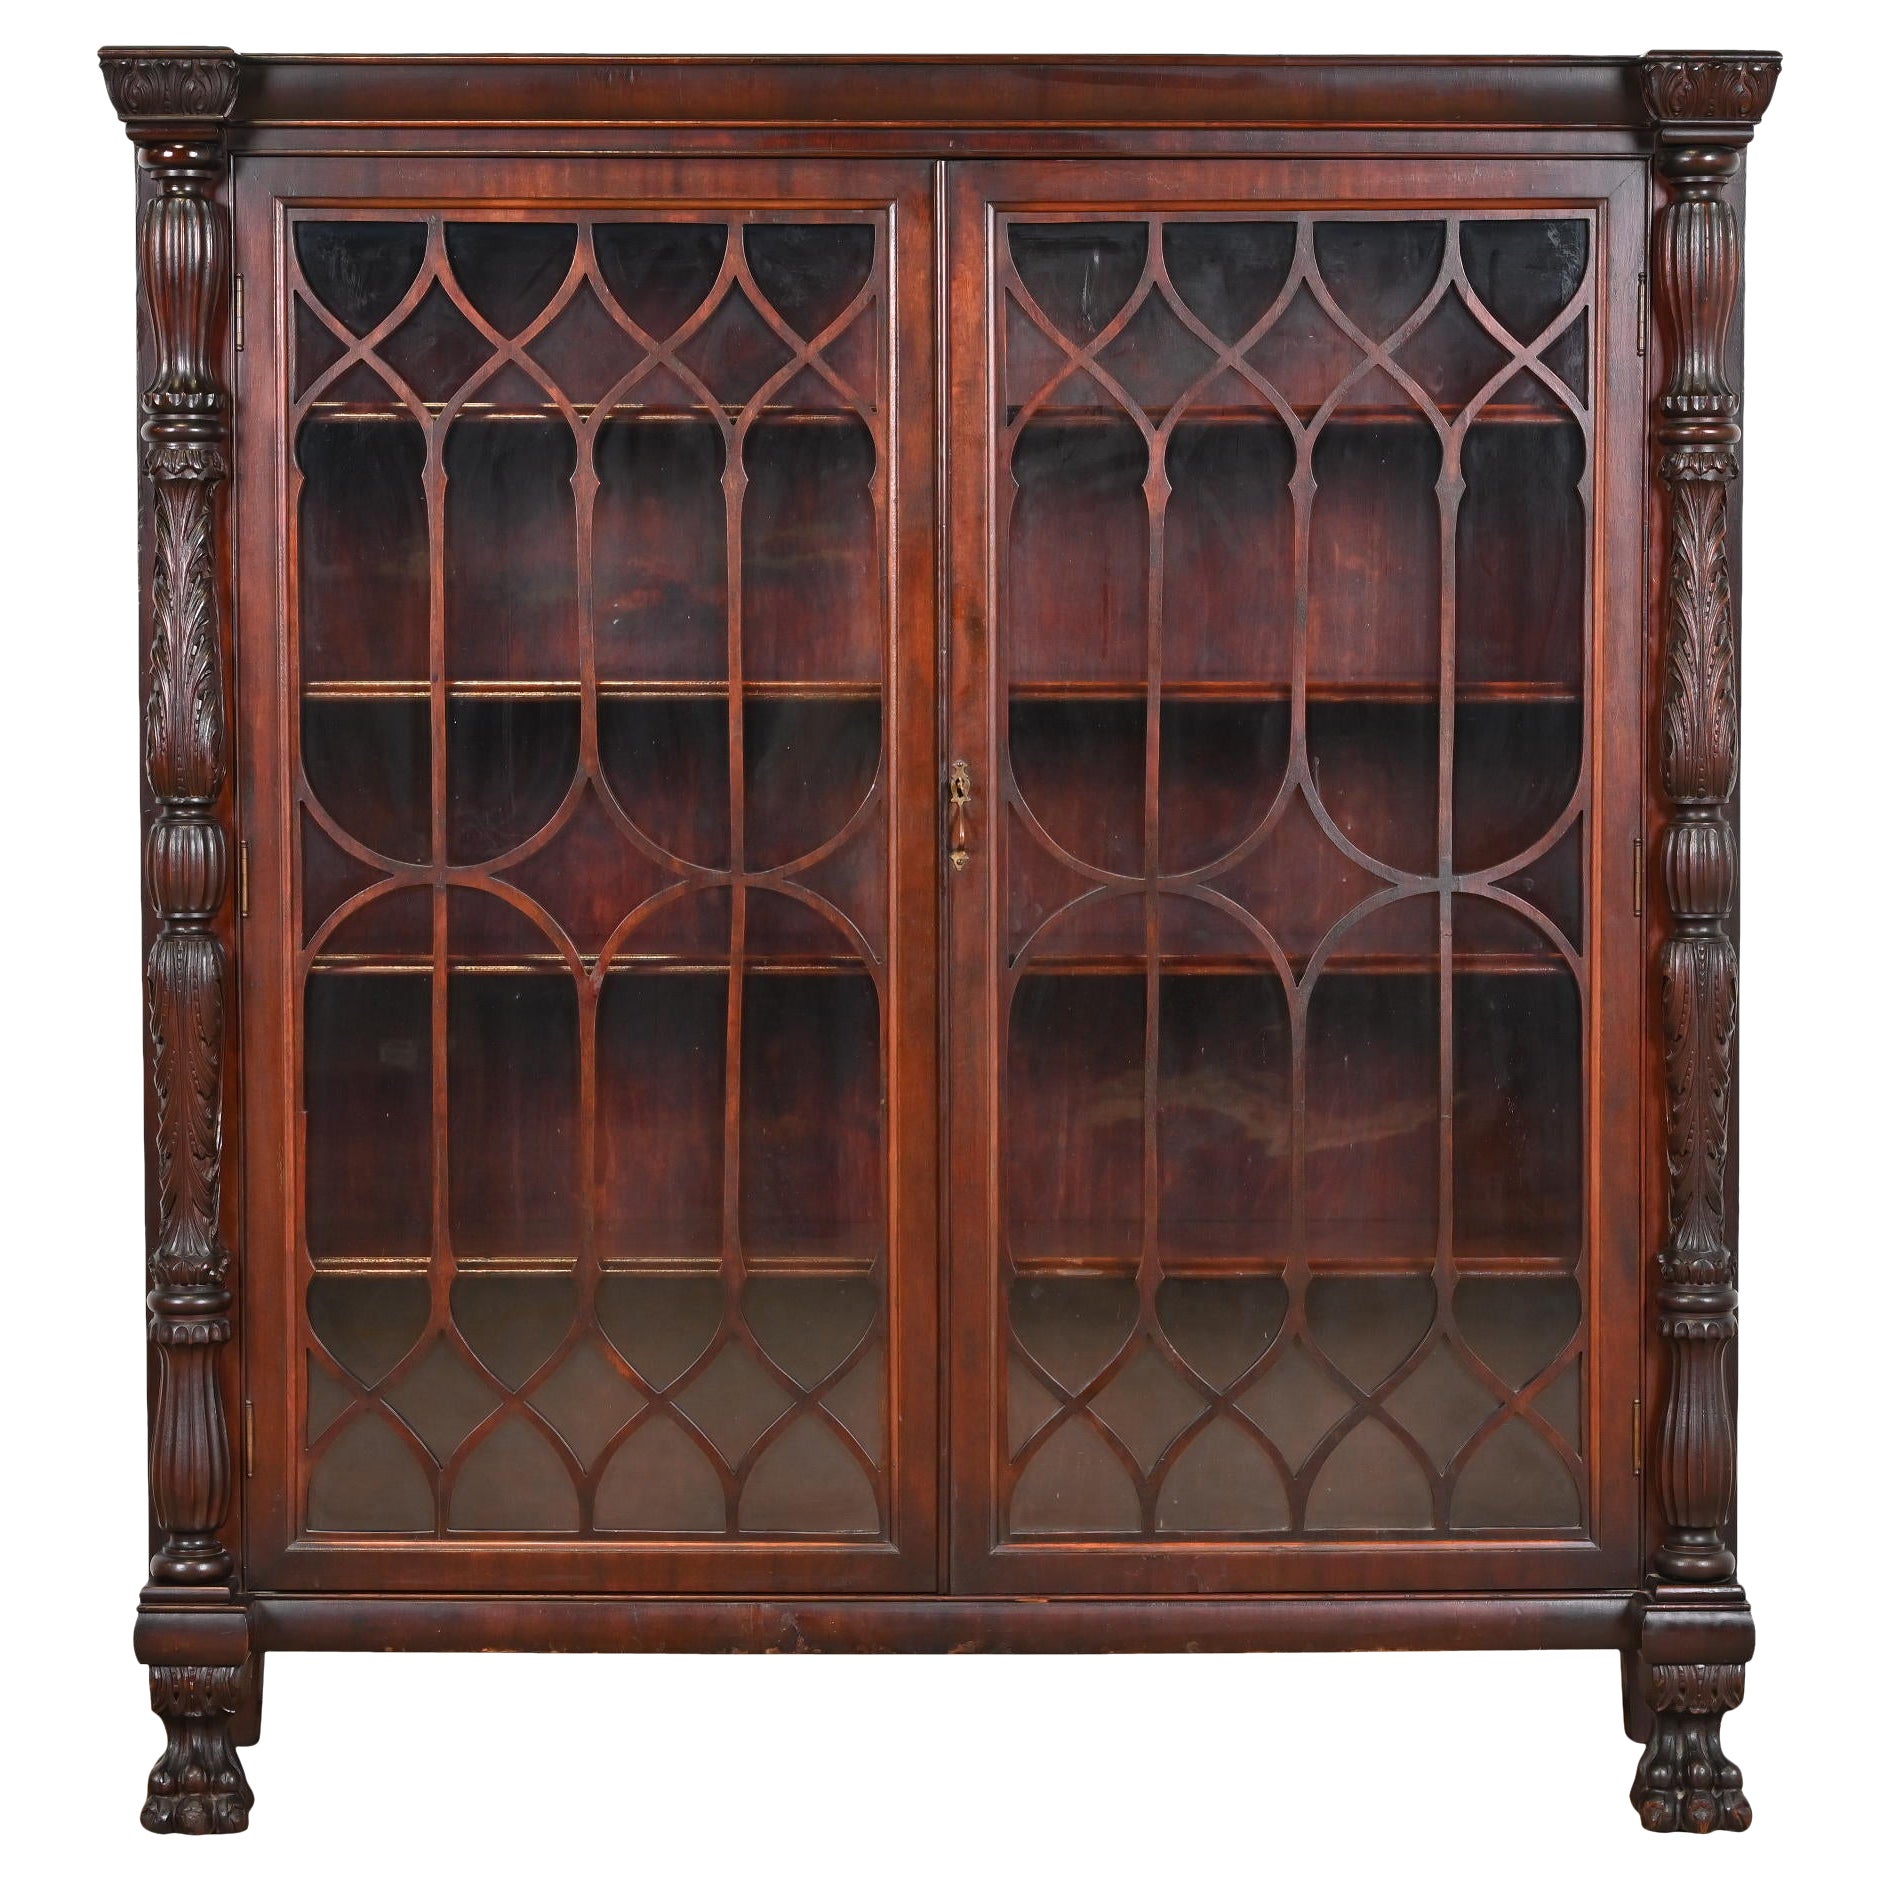 Antique American Empire Carved Mahogany Bookcase in the Manner of R.J. Horner